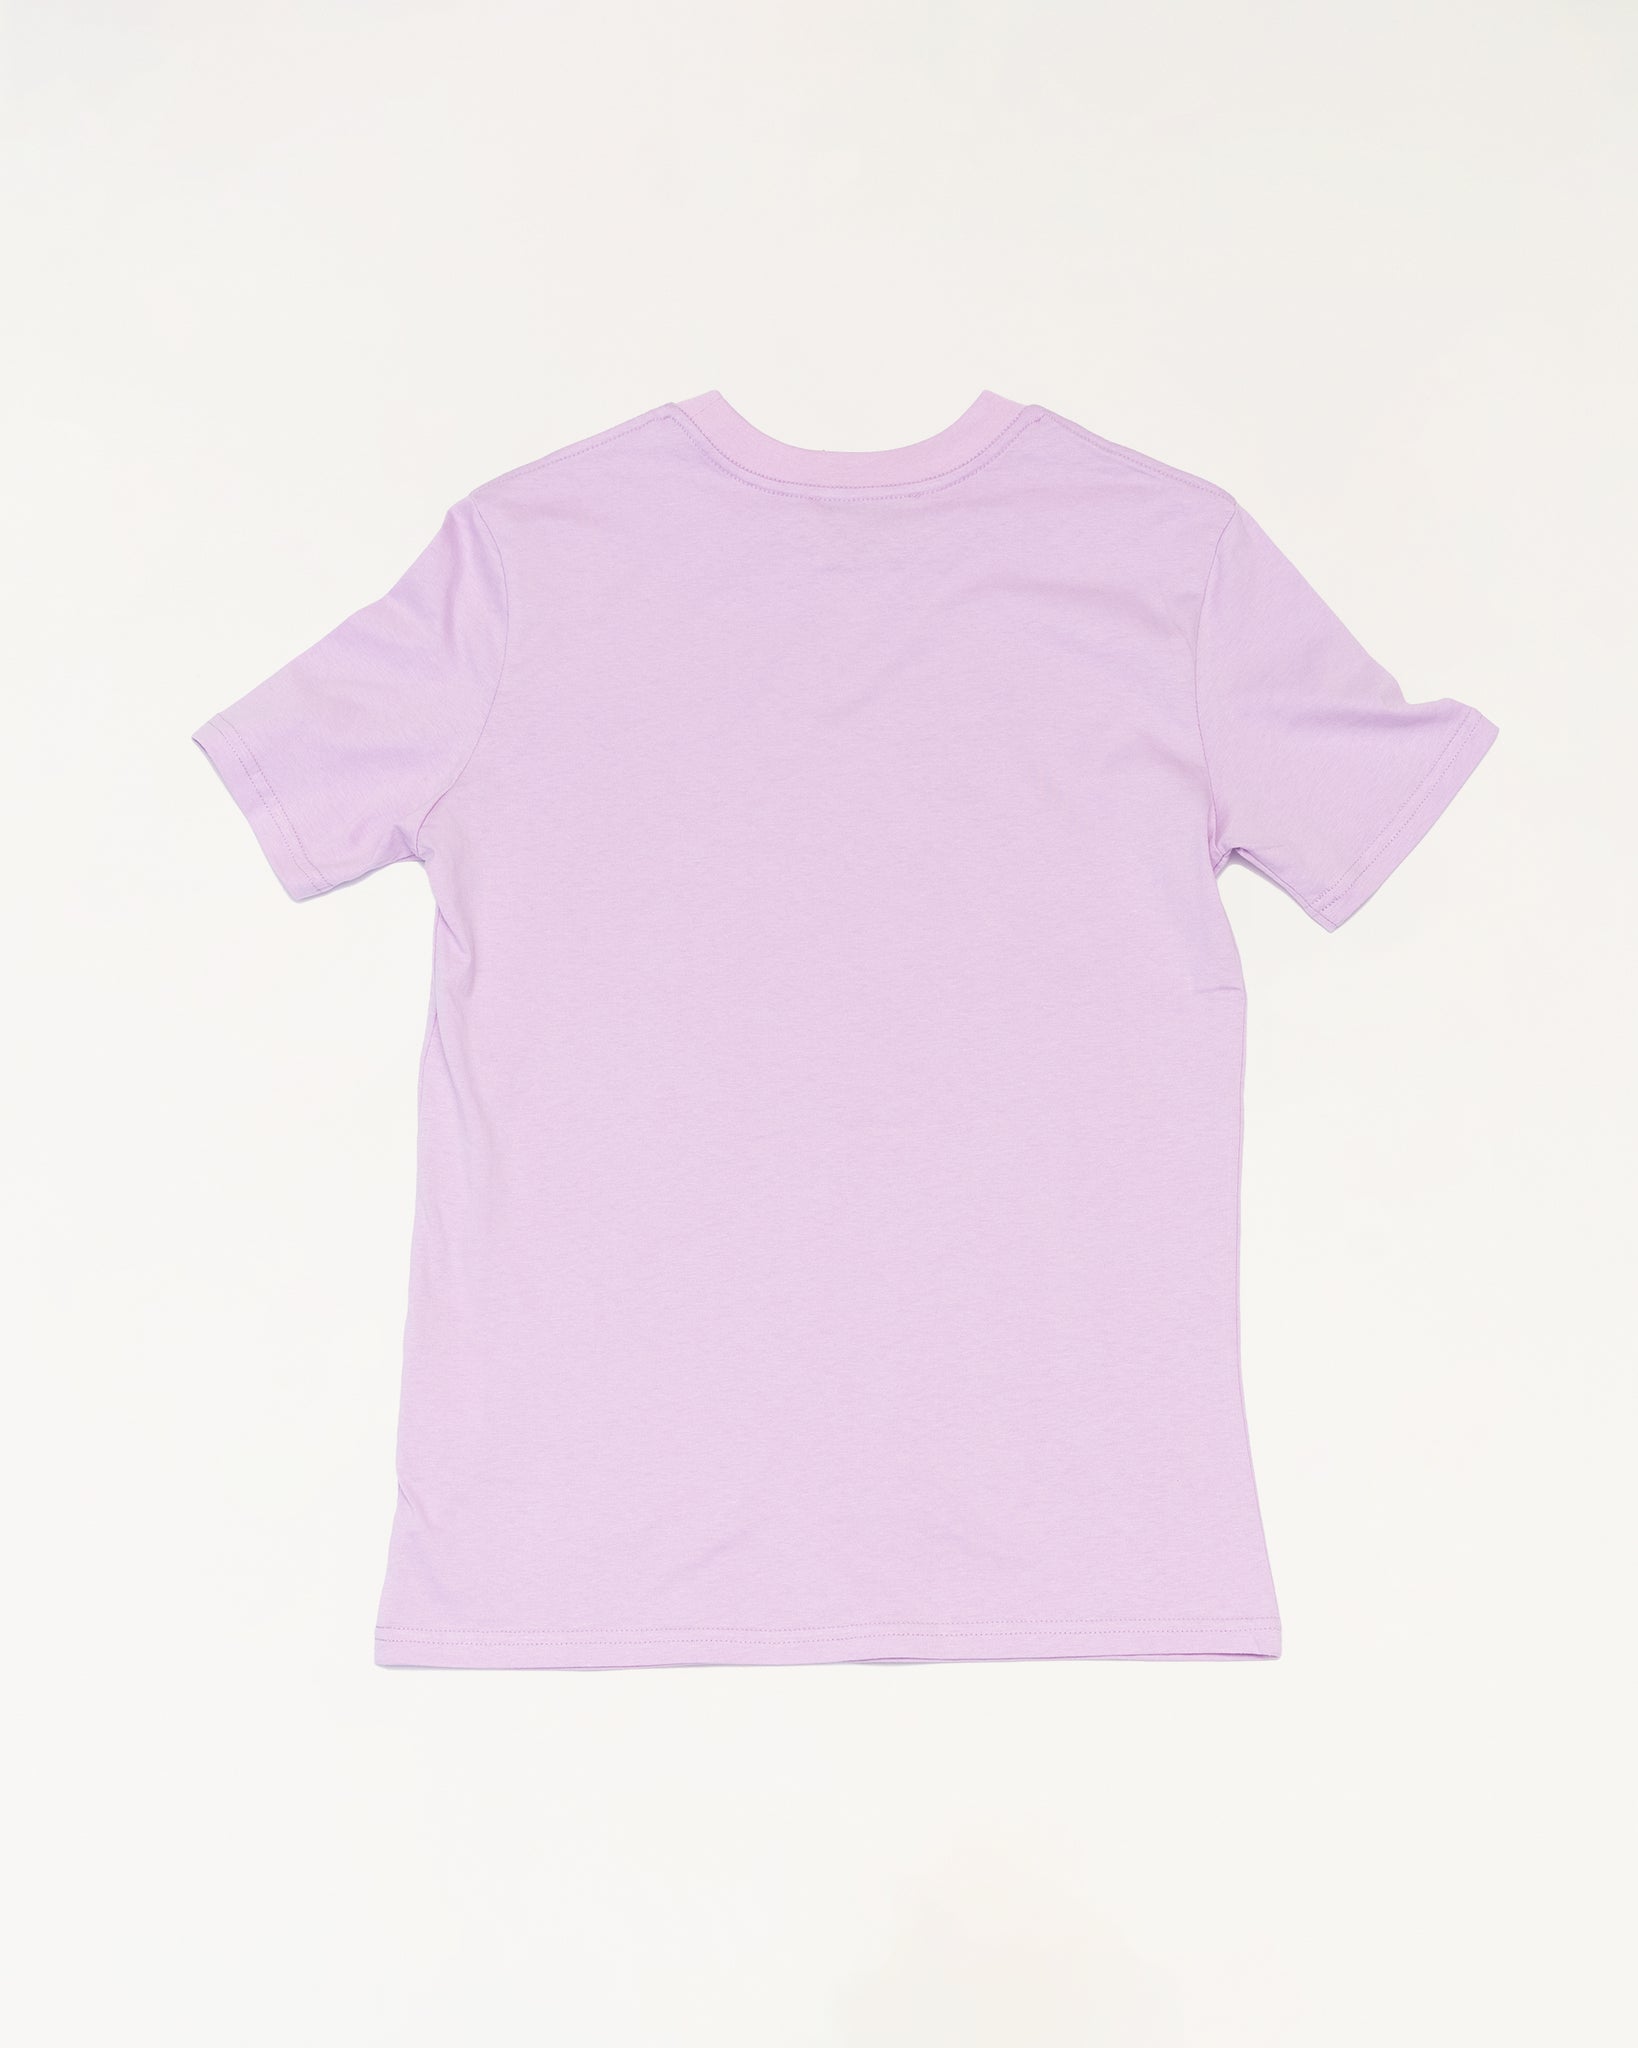 Serial Chillers Tee - Lilac